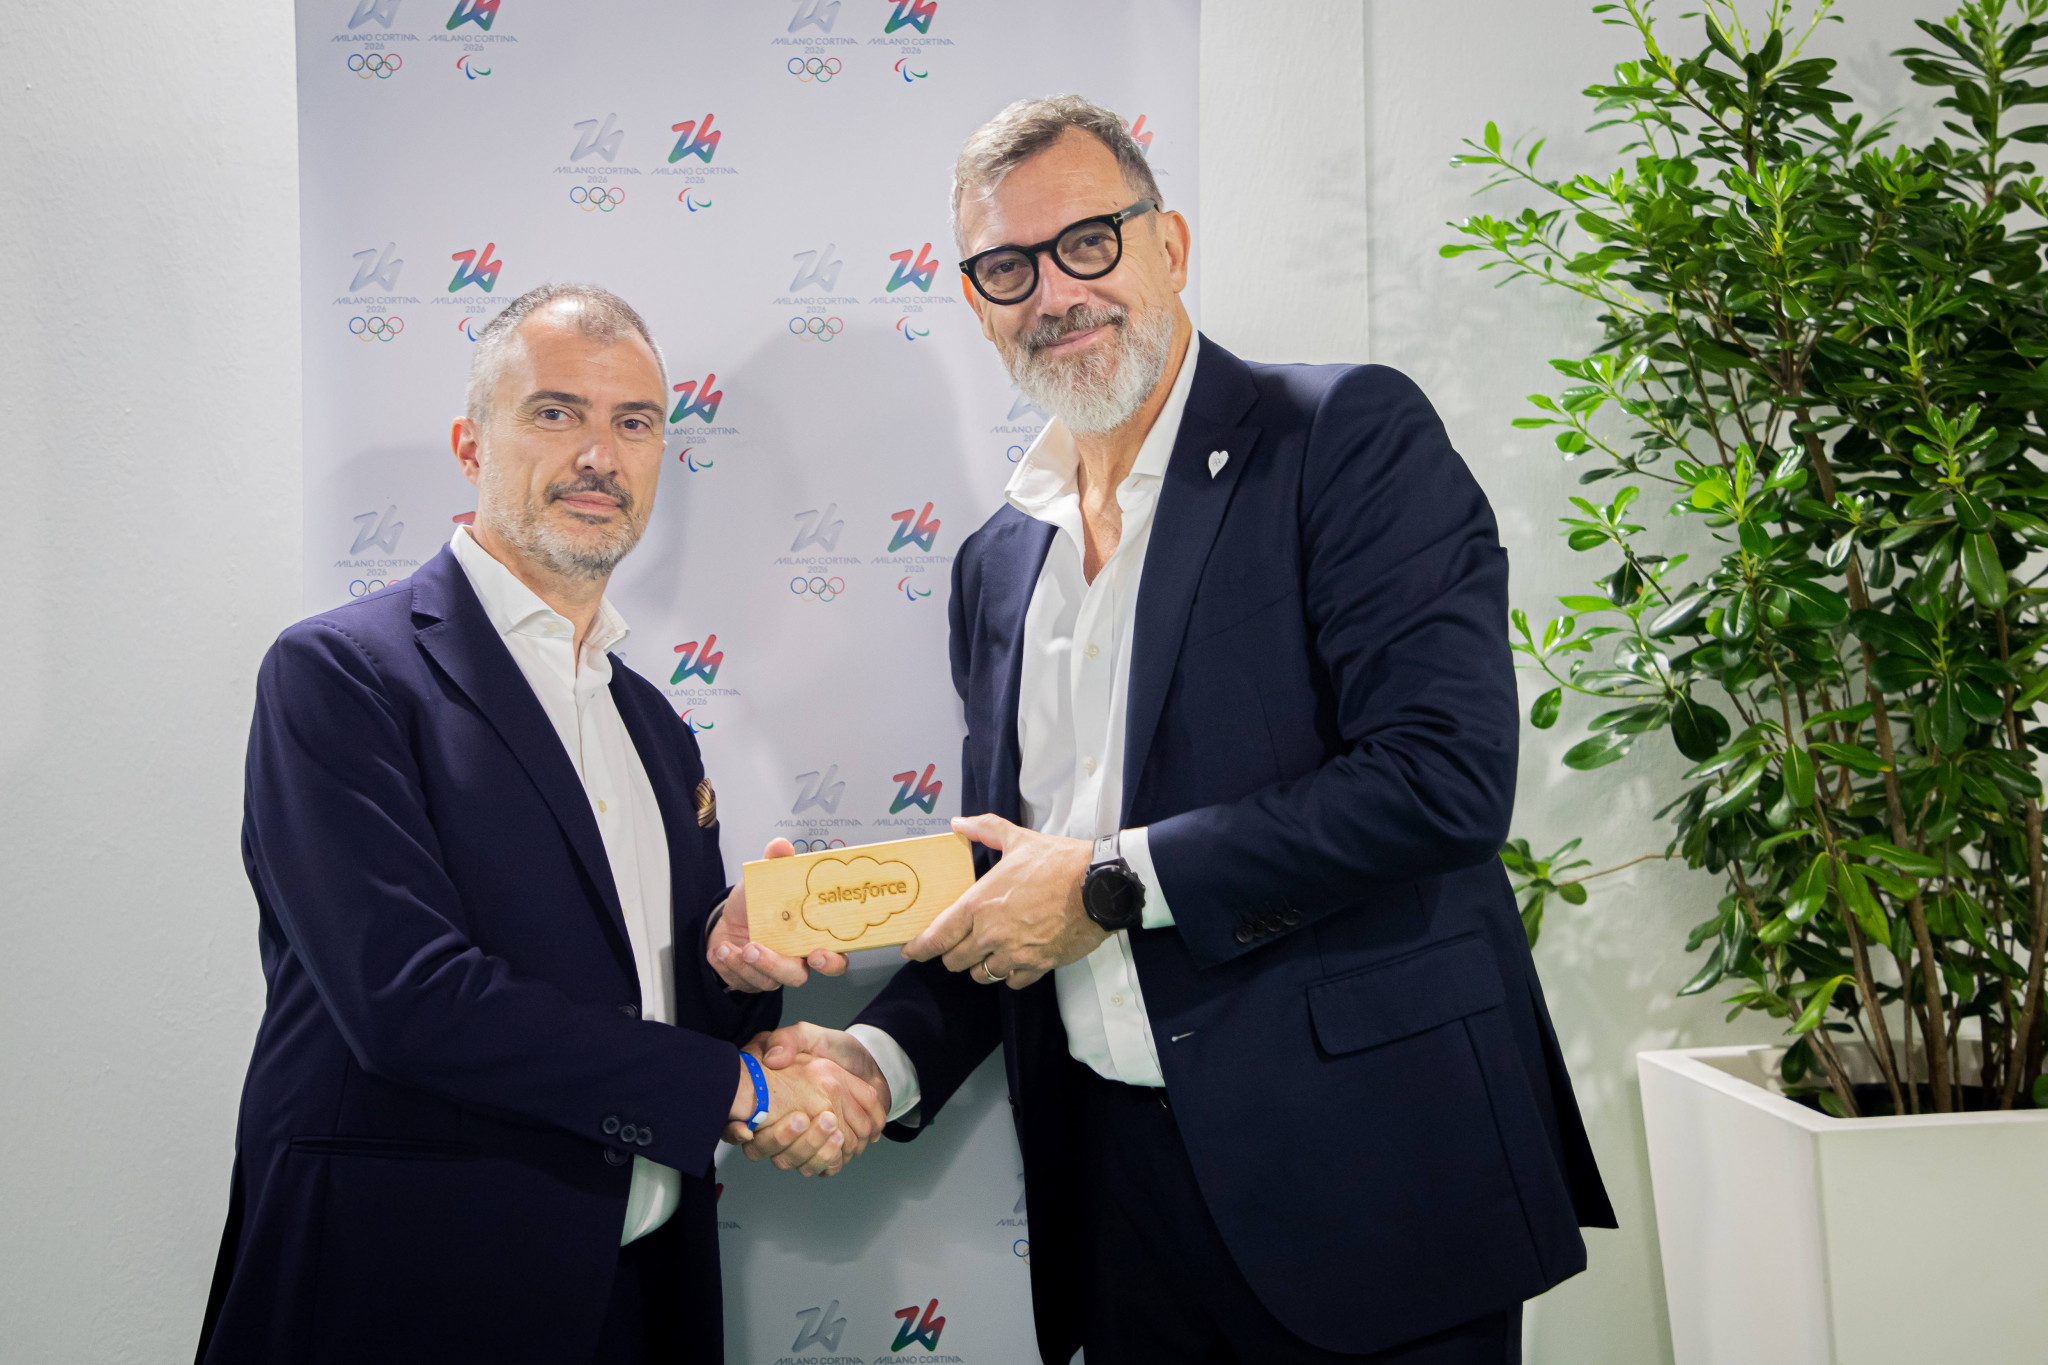 Michele Bensi, Head of Marketing Italy | Salesforce and Nevio Devidè, Marketing, Licensing & Events Director of Milano Cortina 2026 mark their organisations' partnership for the Games ©Milan Cortina 2026